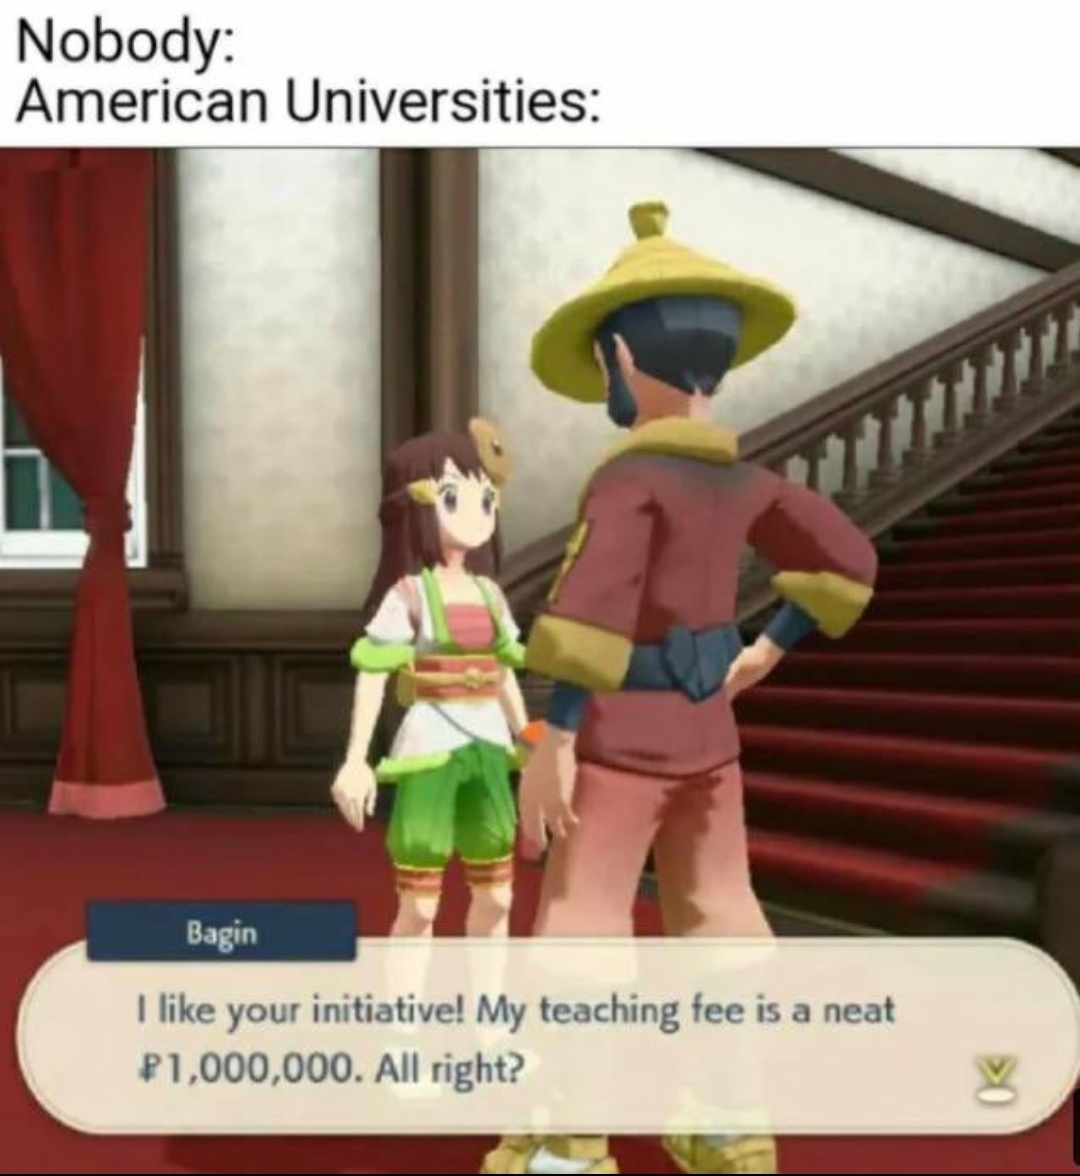 dank memes - funny memes - Pokémon Legends: Arceus - Nobody American Universities Bagin I your initiative! My teaching fee is a neat P1,000,000. All right?